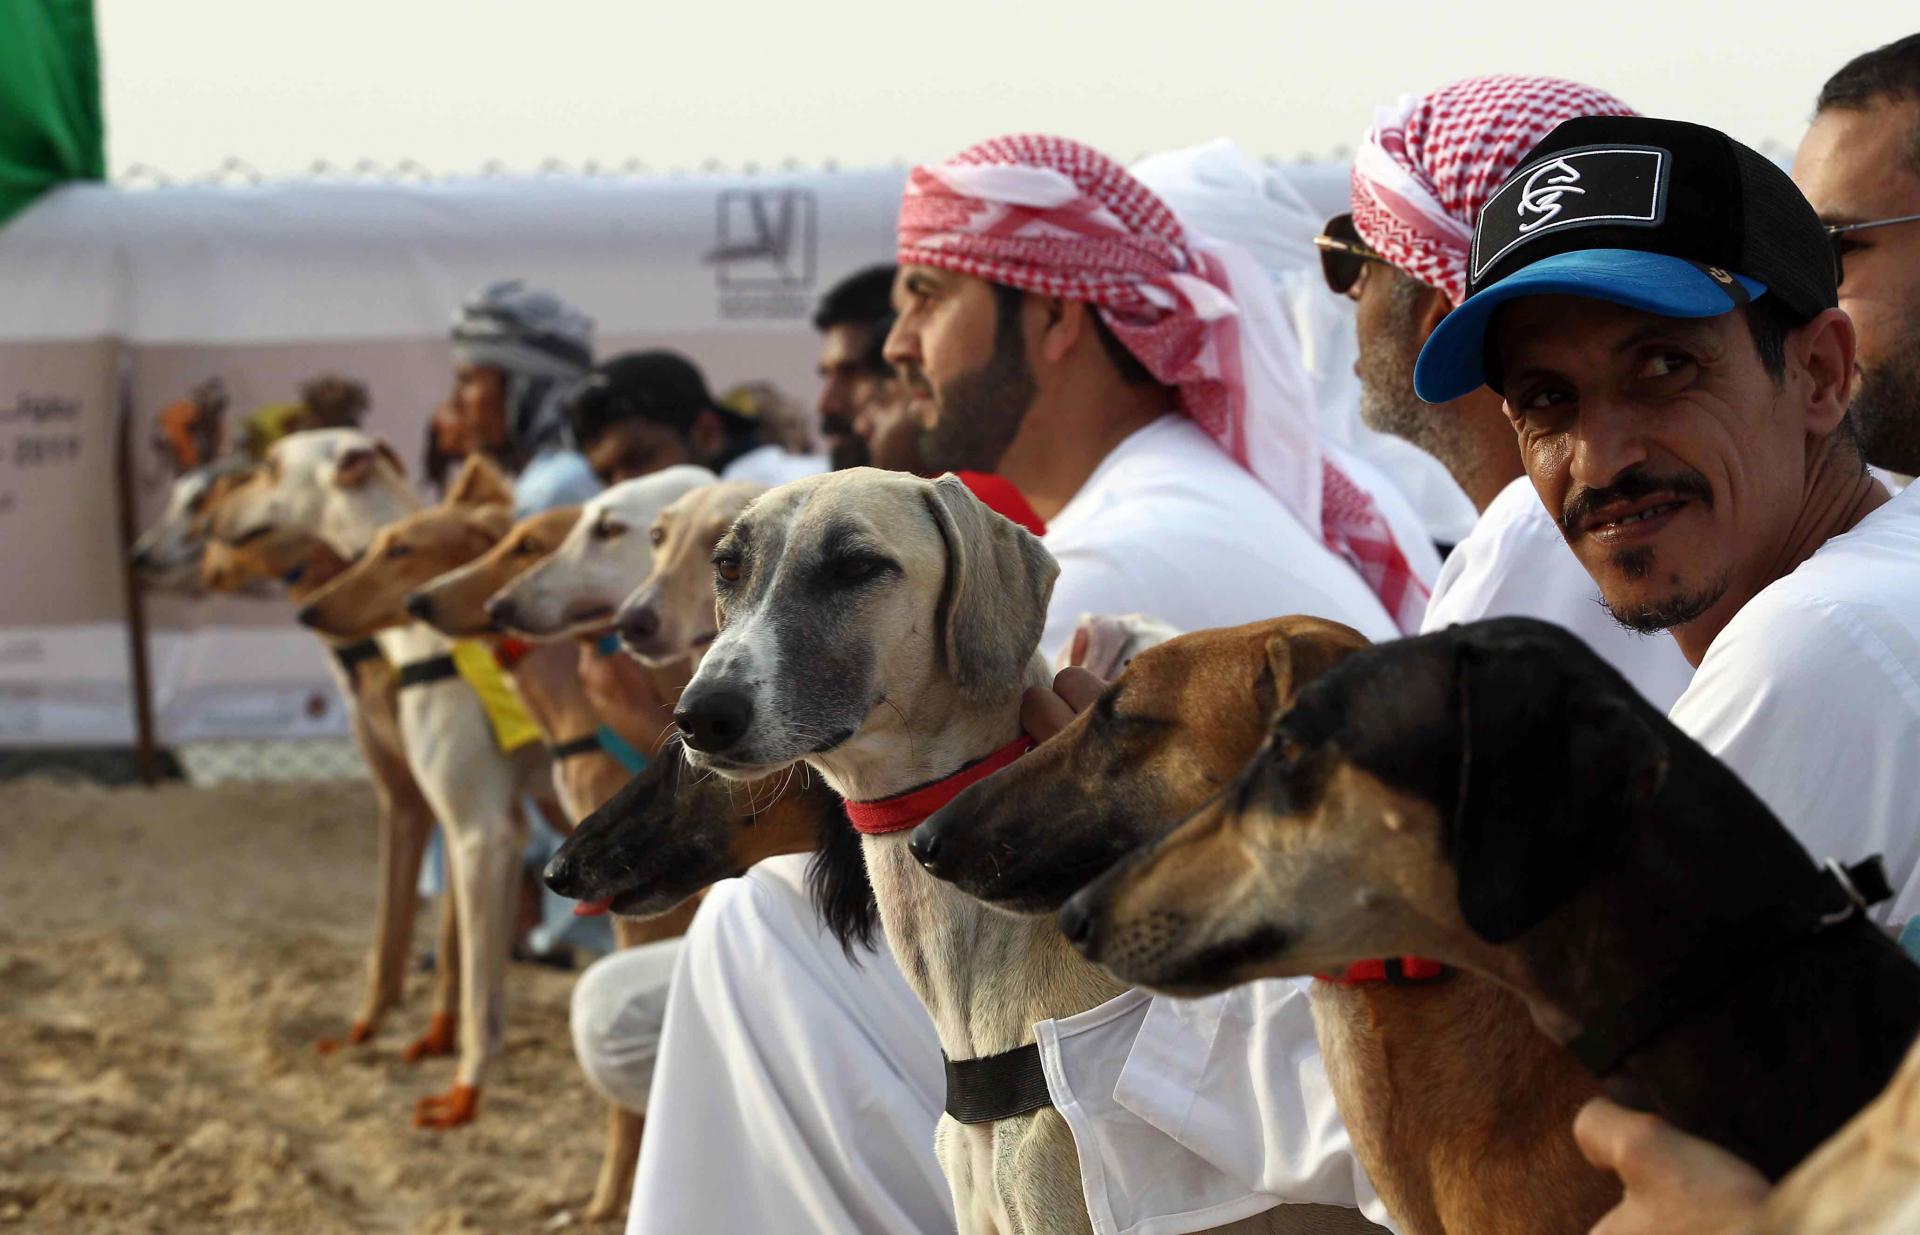 The race prizes soared to a total of AED 320,000